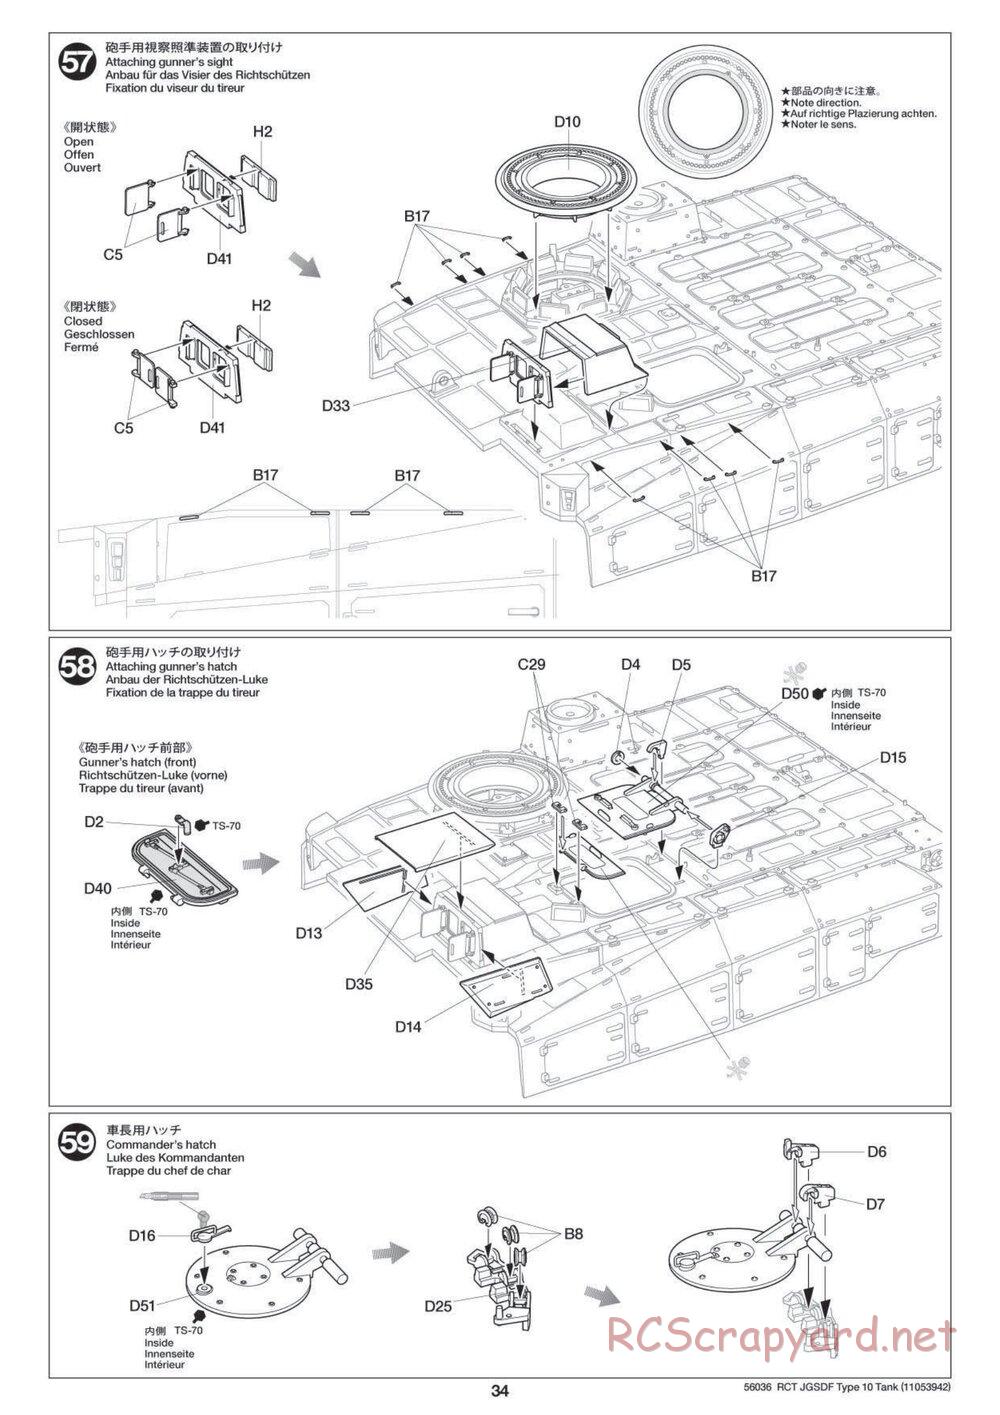 Tamiya - JGSDF Type 10 Tank - 1/16 Scale Chassis - Manual - Page 34